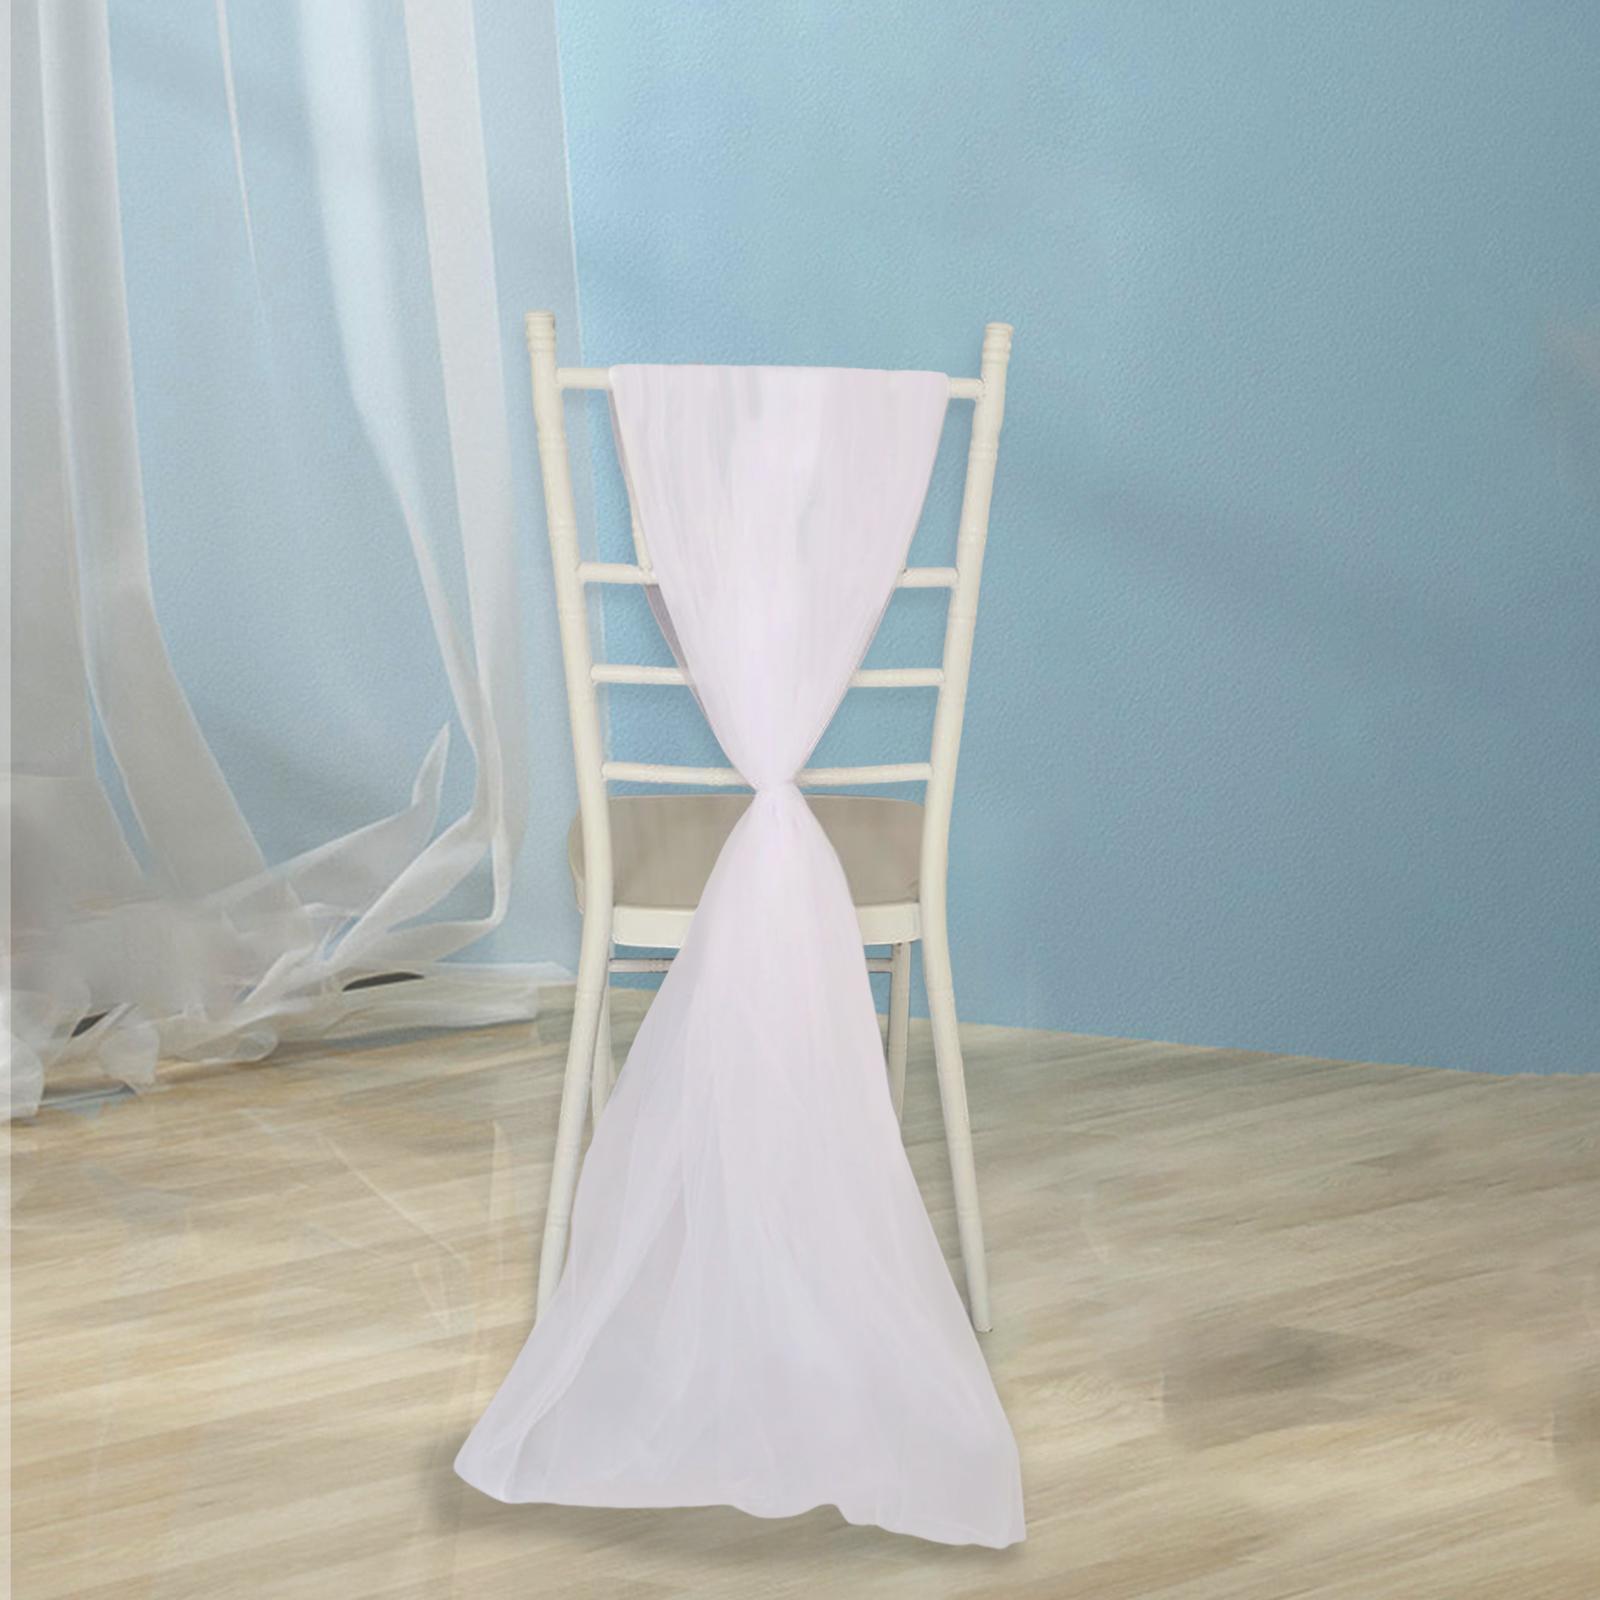 Wedding Tulle Roll Curtain Chair Sashes DIY for Party Centerpiece Chair